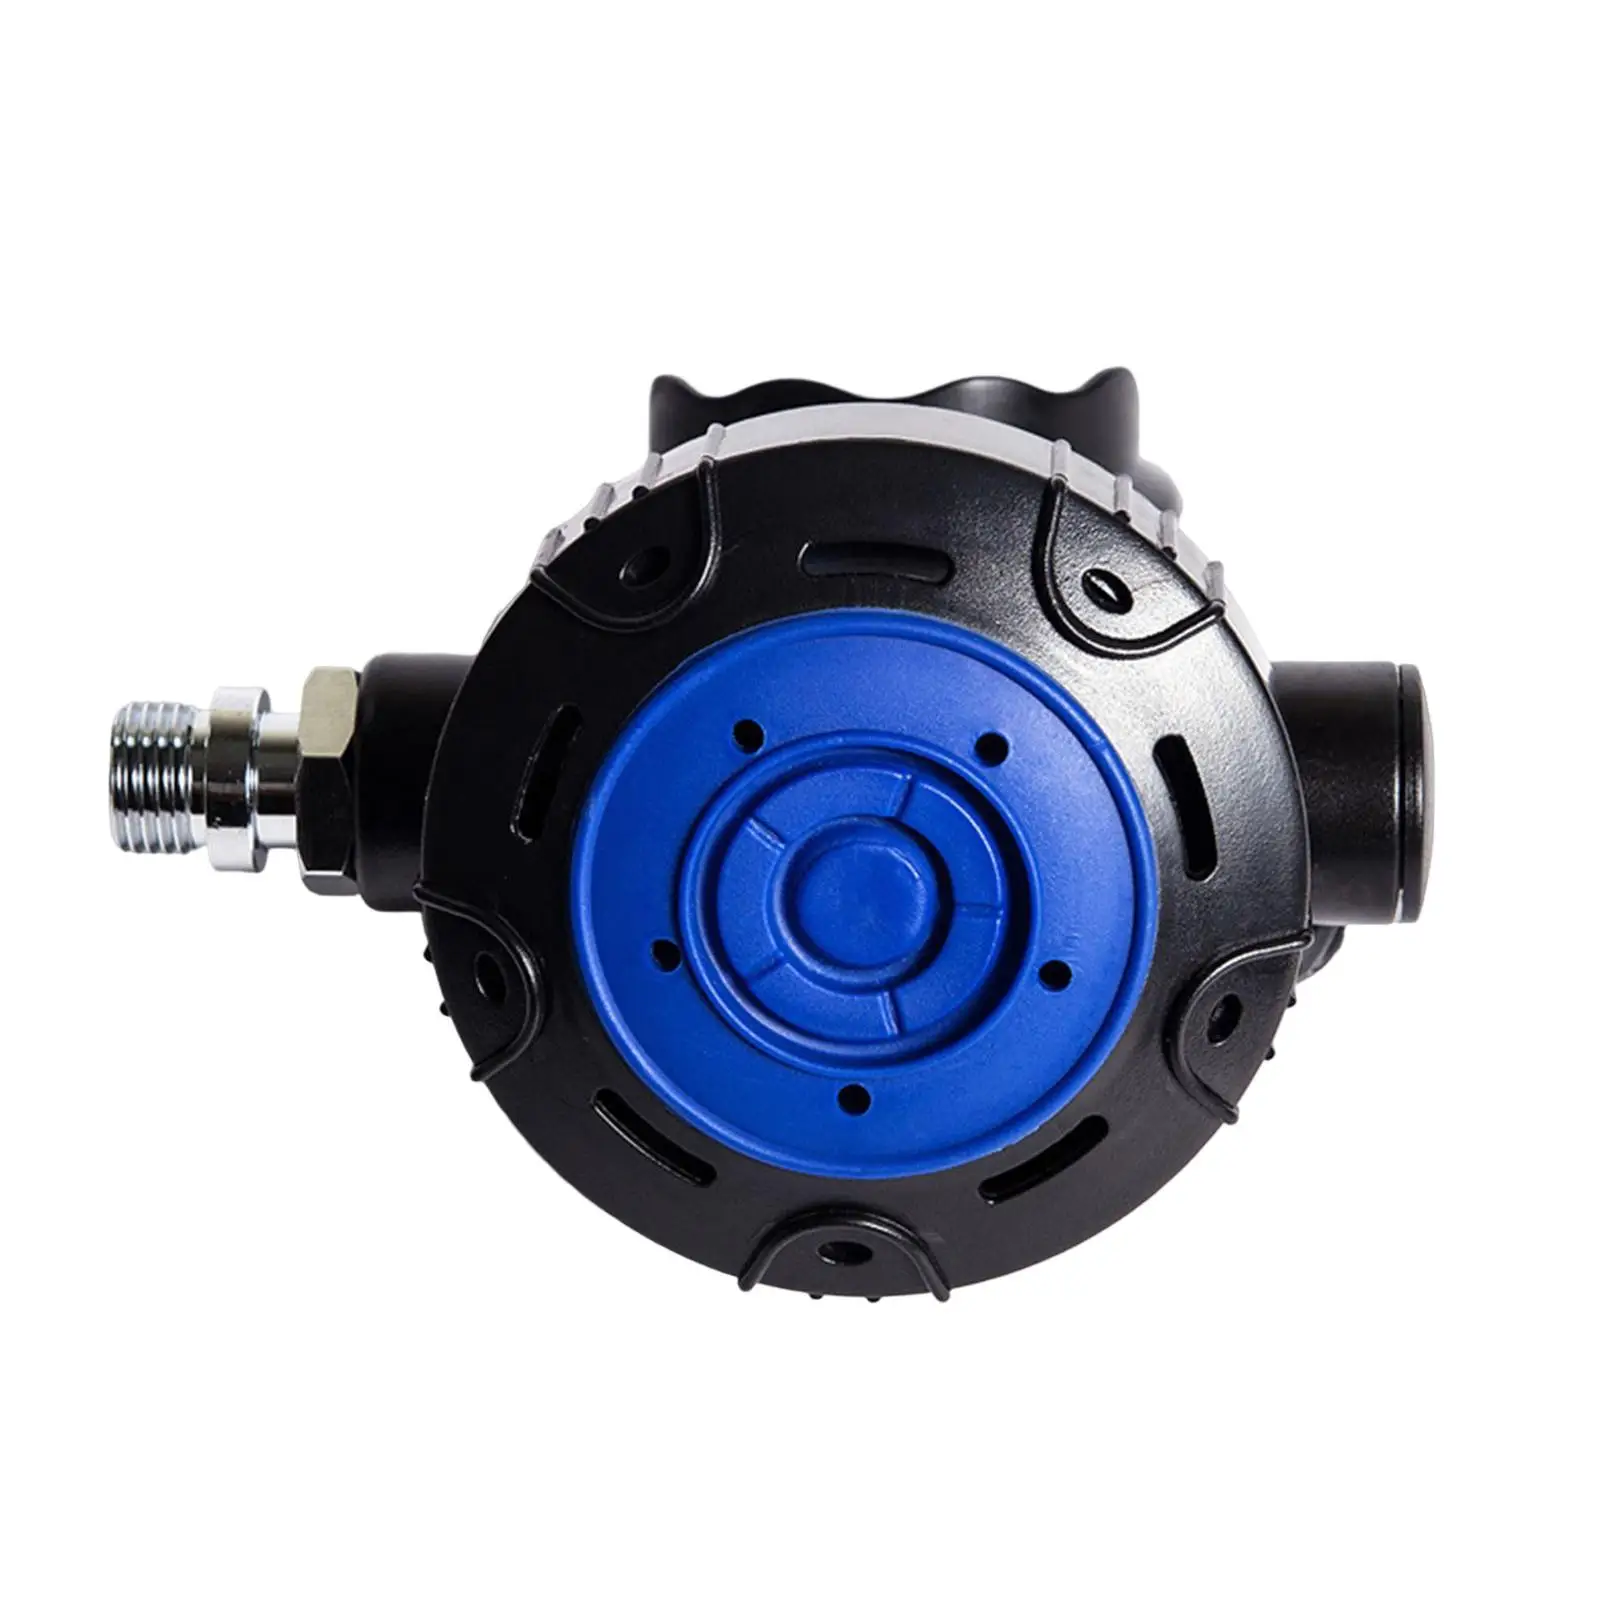 Scuba Diving Dive Regulator Second 2ND Stage Octopus Pressure Reducing Diving Supplies